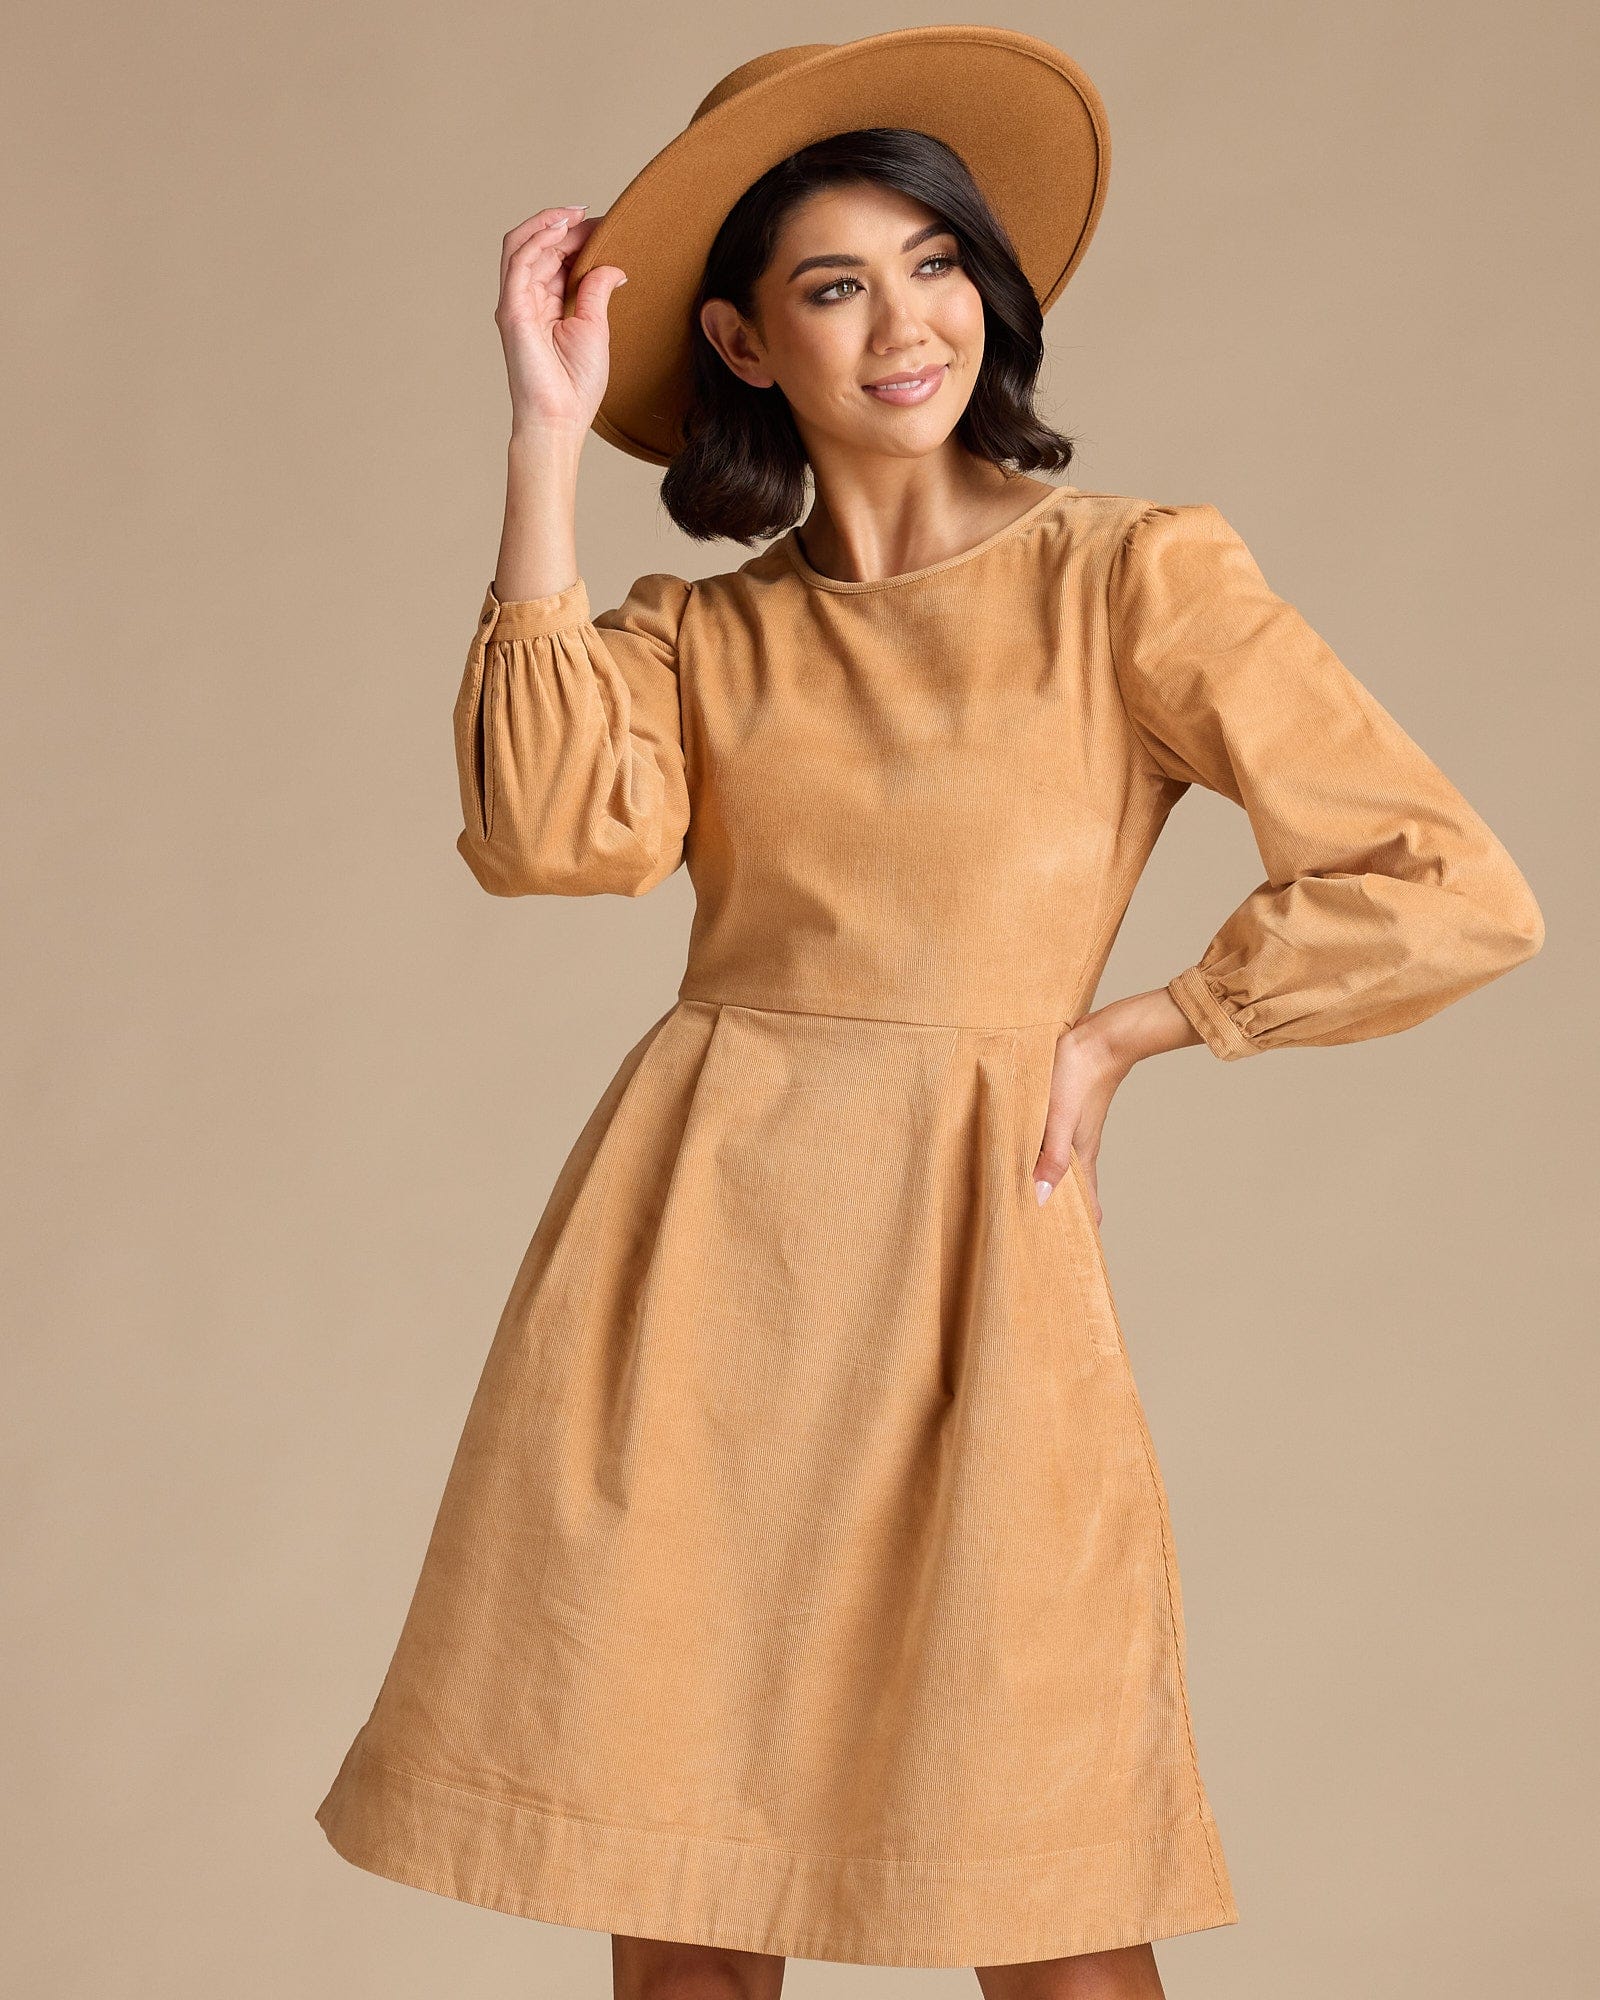 Woman in a long sleeve, knee-length, yellow dress